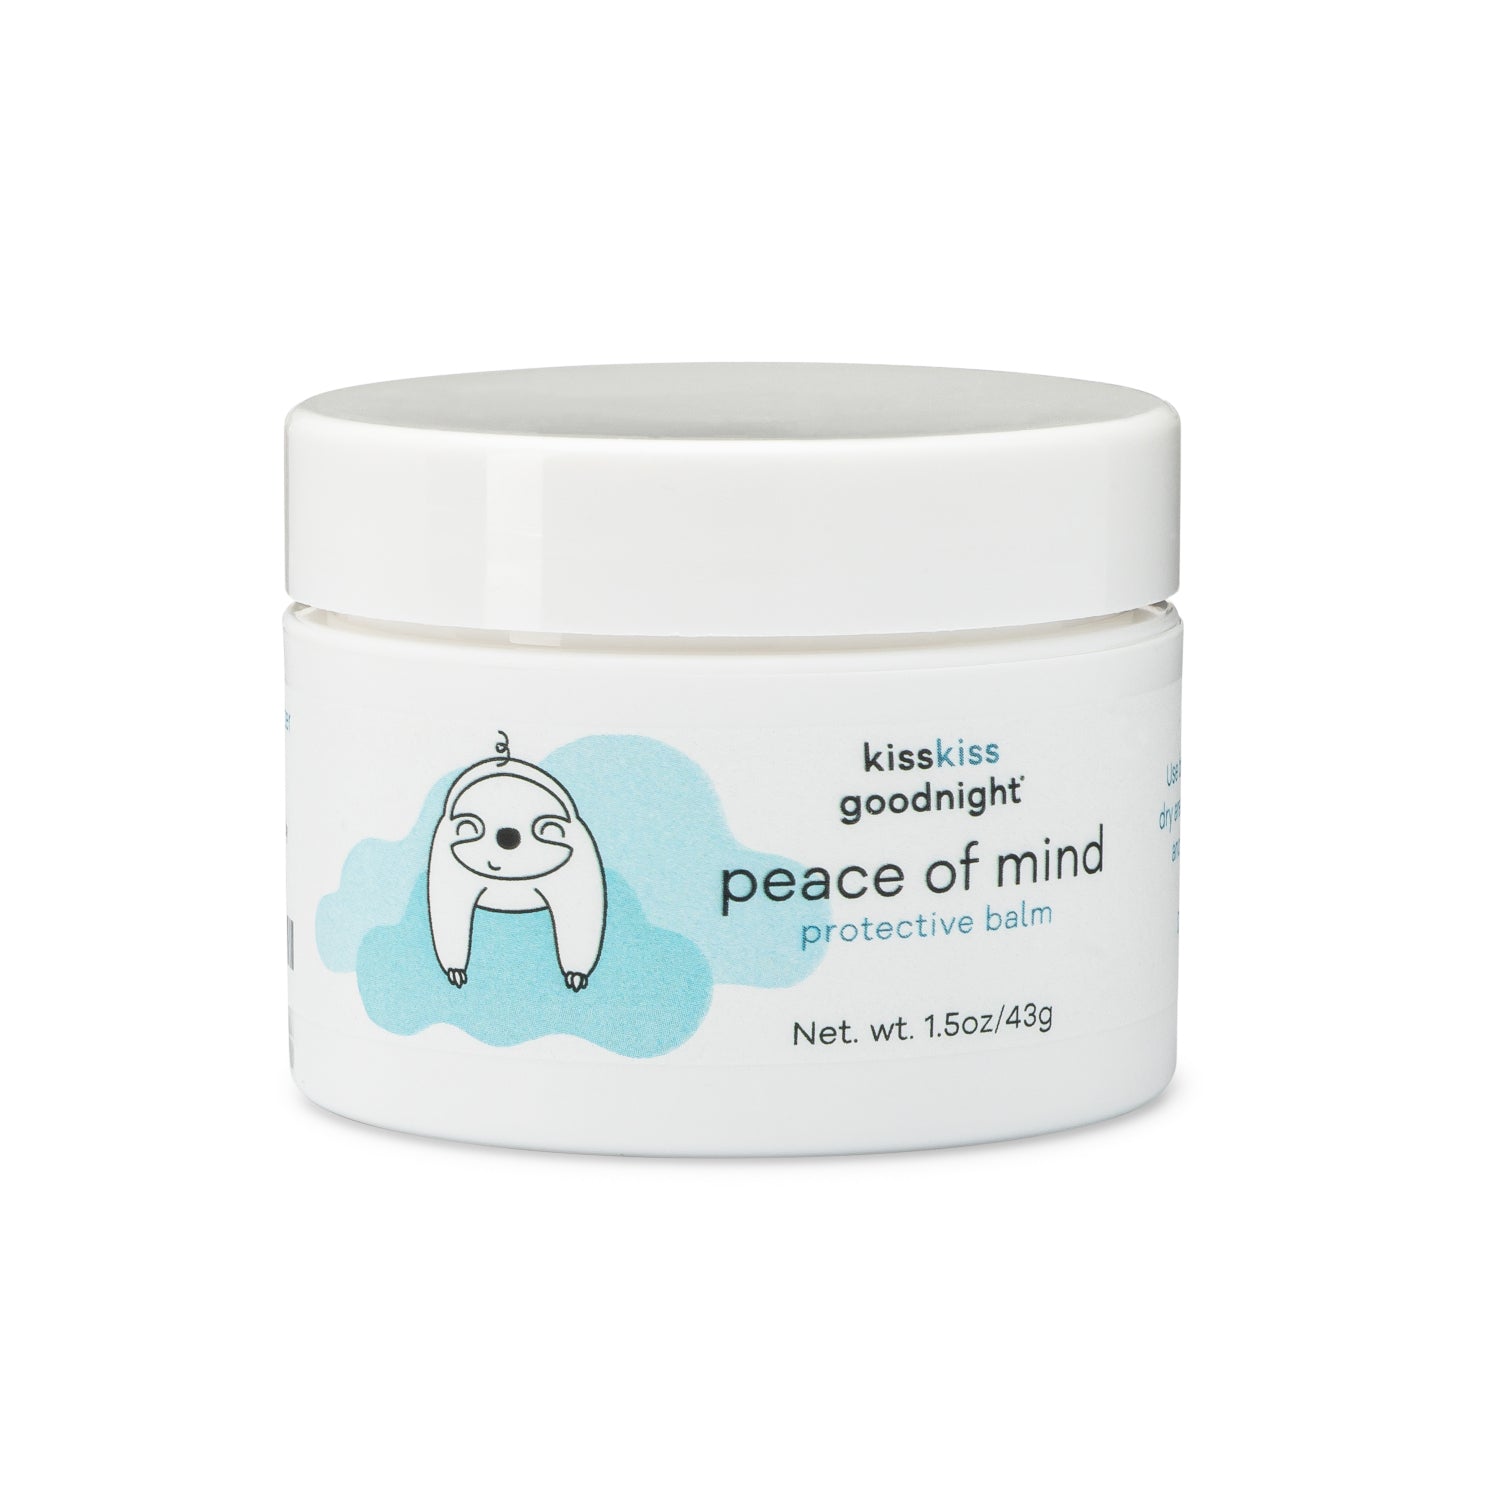 BABY'S 1ST SKINCARE - 1ST COLD CREAM PROTECTIVE, ULTRA-NOURISHING